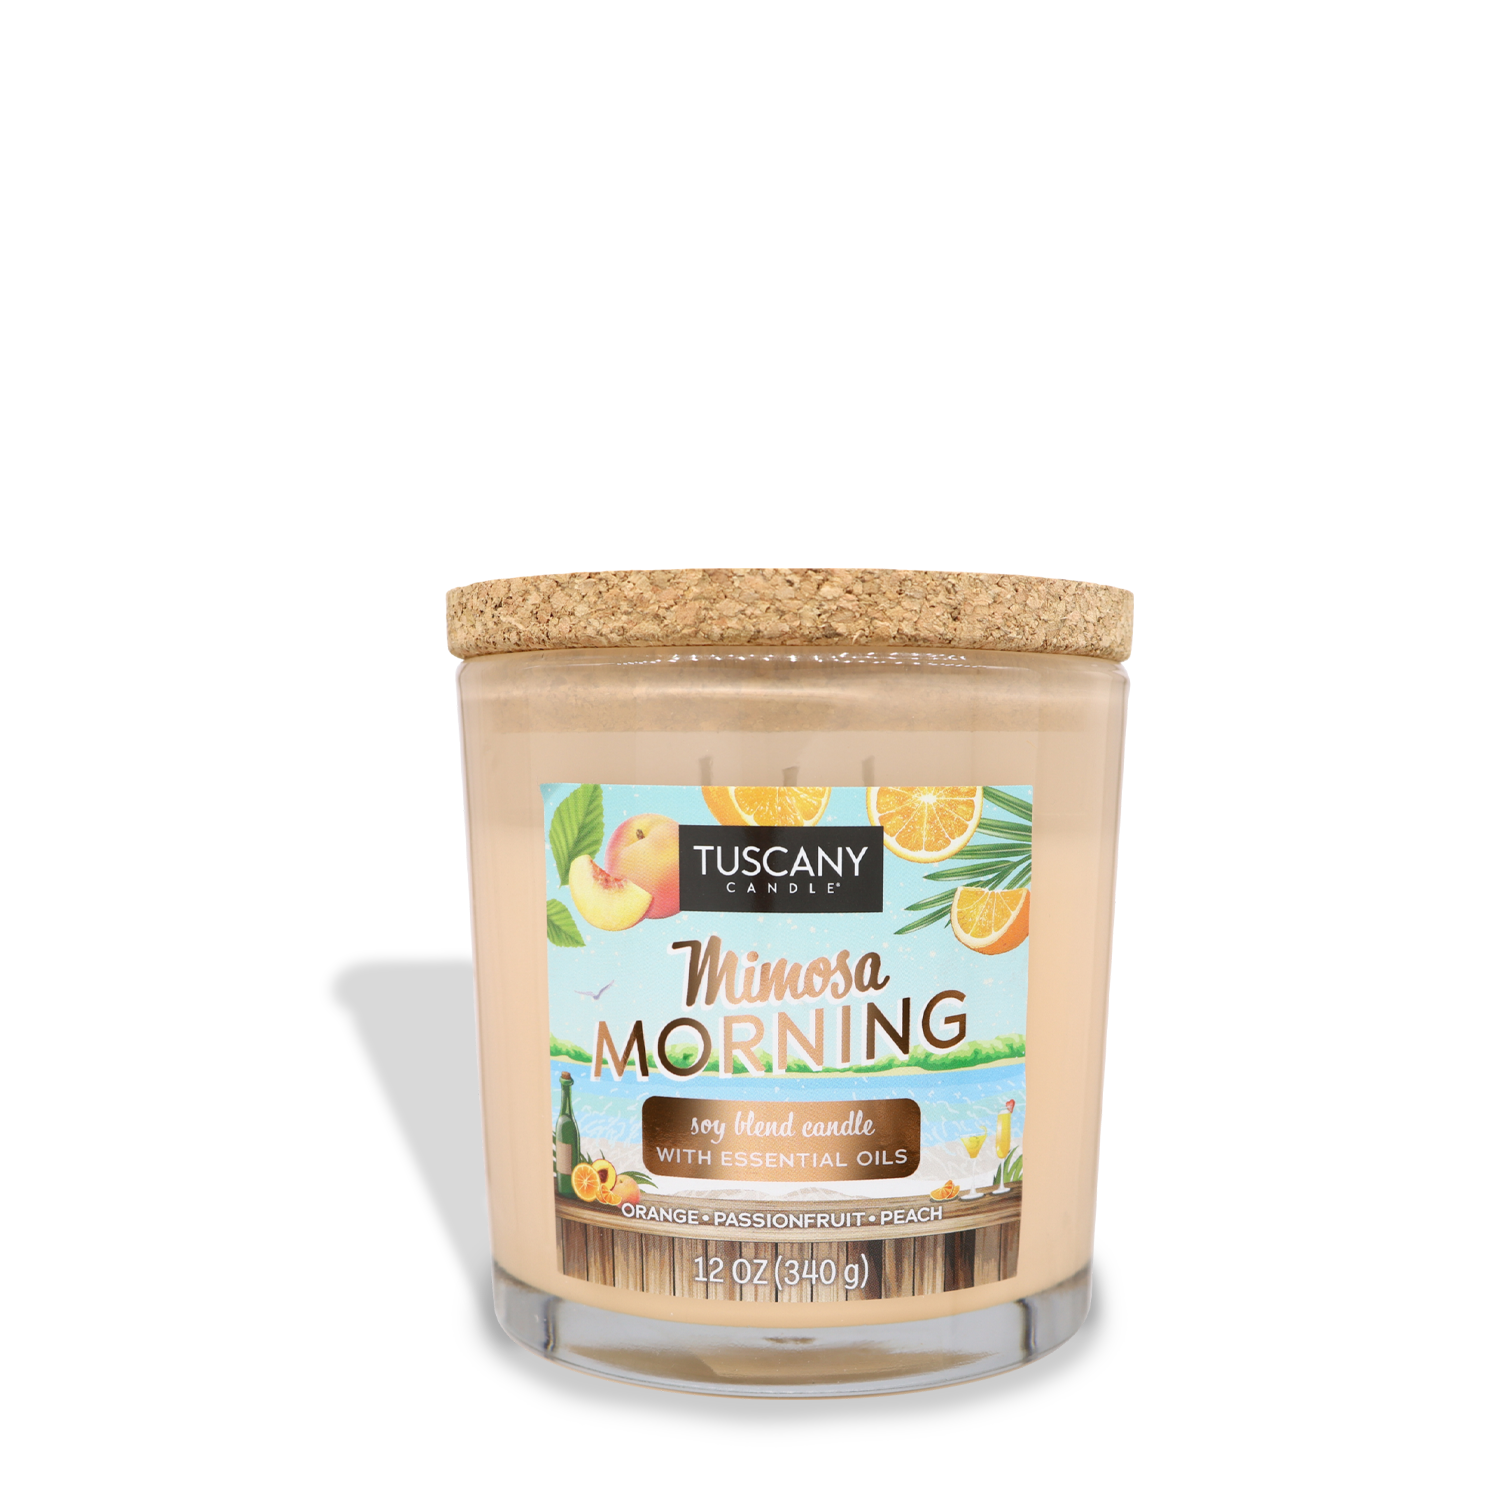 A 12 oz scented soy blend candle named "Mimosa Morning (12 oz) – Sunset Beach Bar Collection" by Tuscany Candle® SEASONAL, infused with essential oils of orange, passionfruit, and peach. It features a charming cork lid.